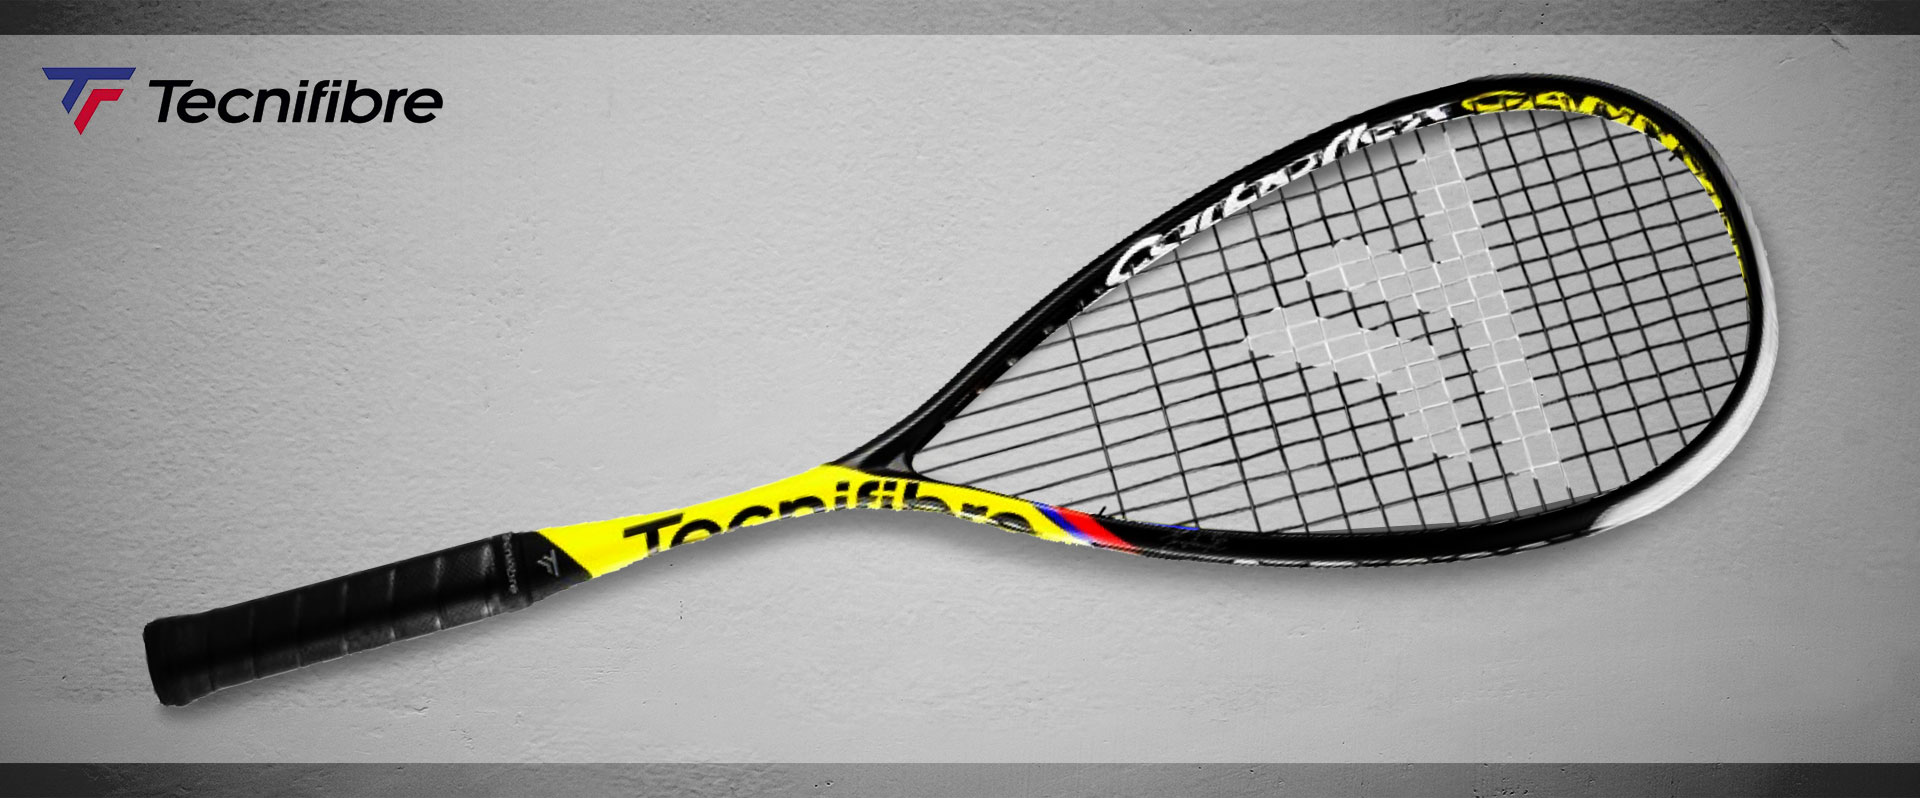 Top 5 Squash Racquets to get in